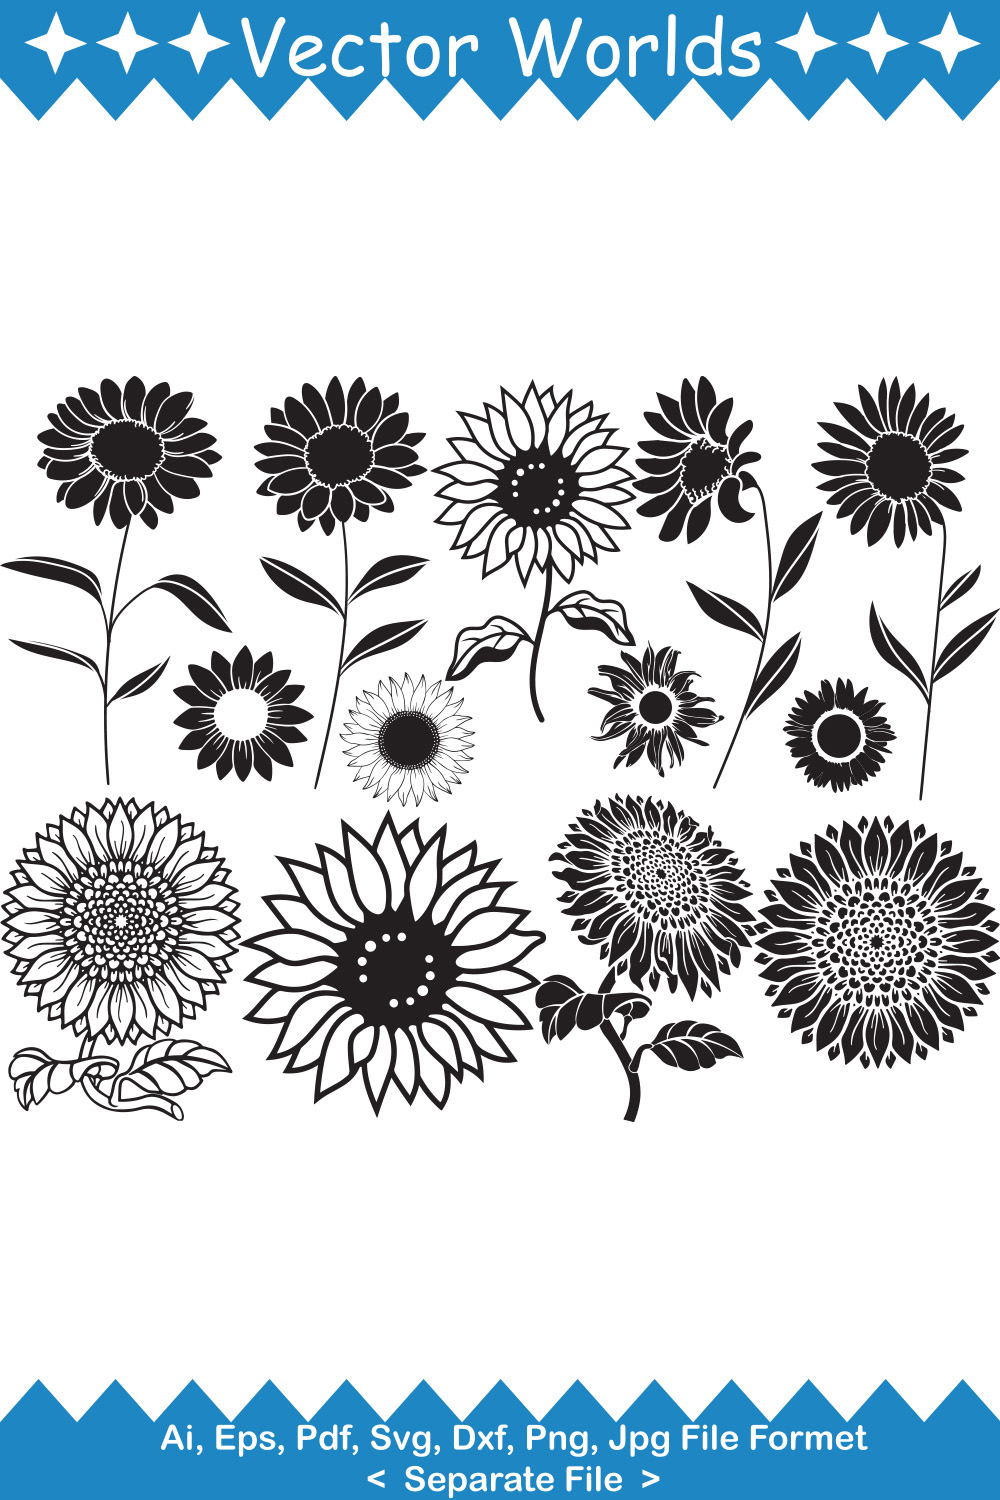 Bundle of vector amazing images of sunflower silhouettes.